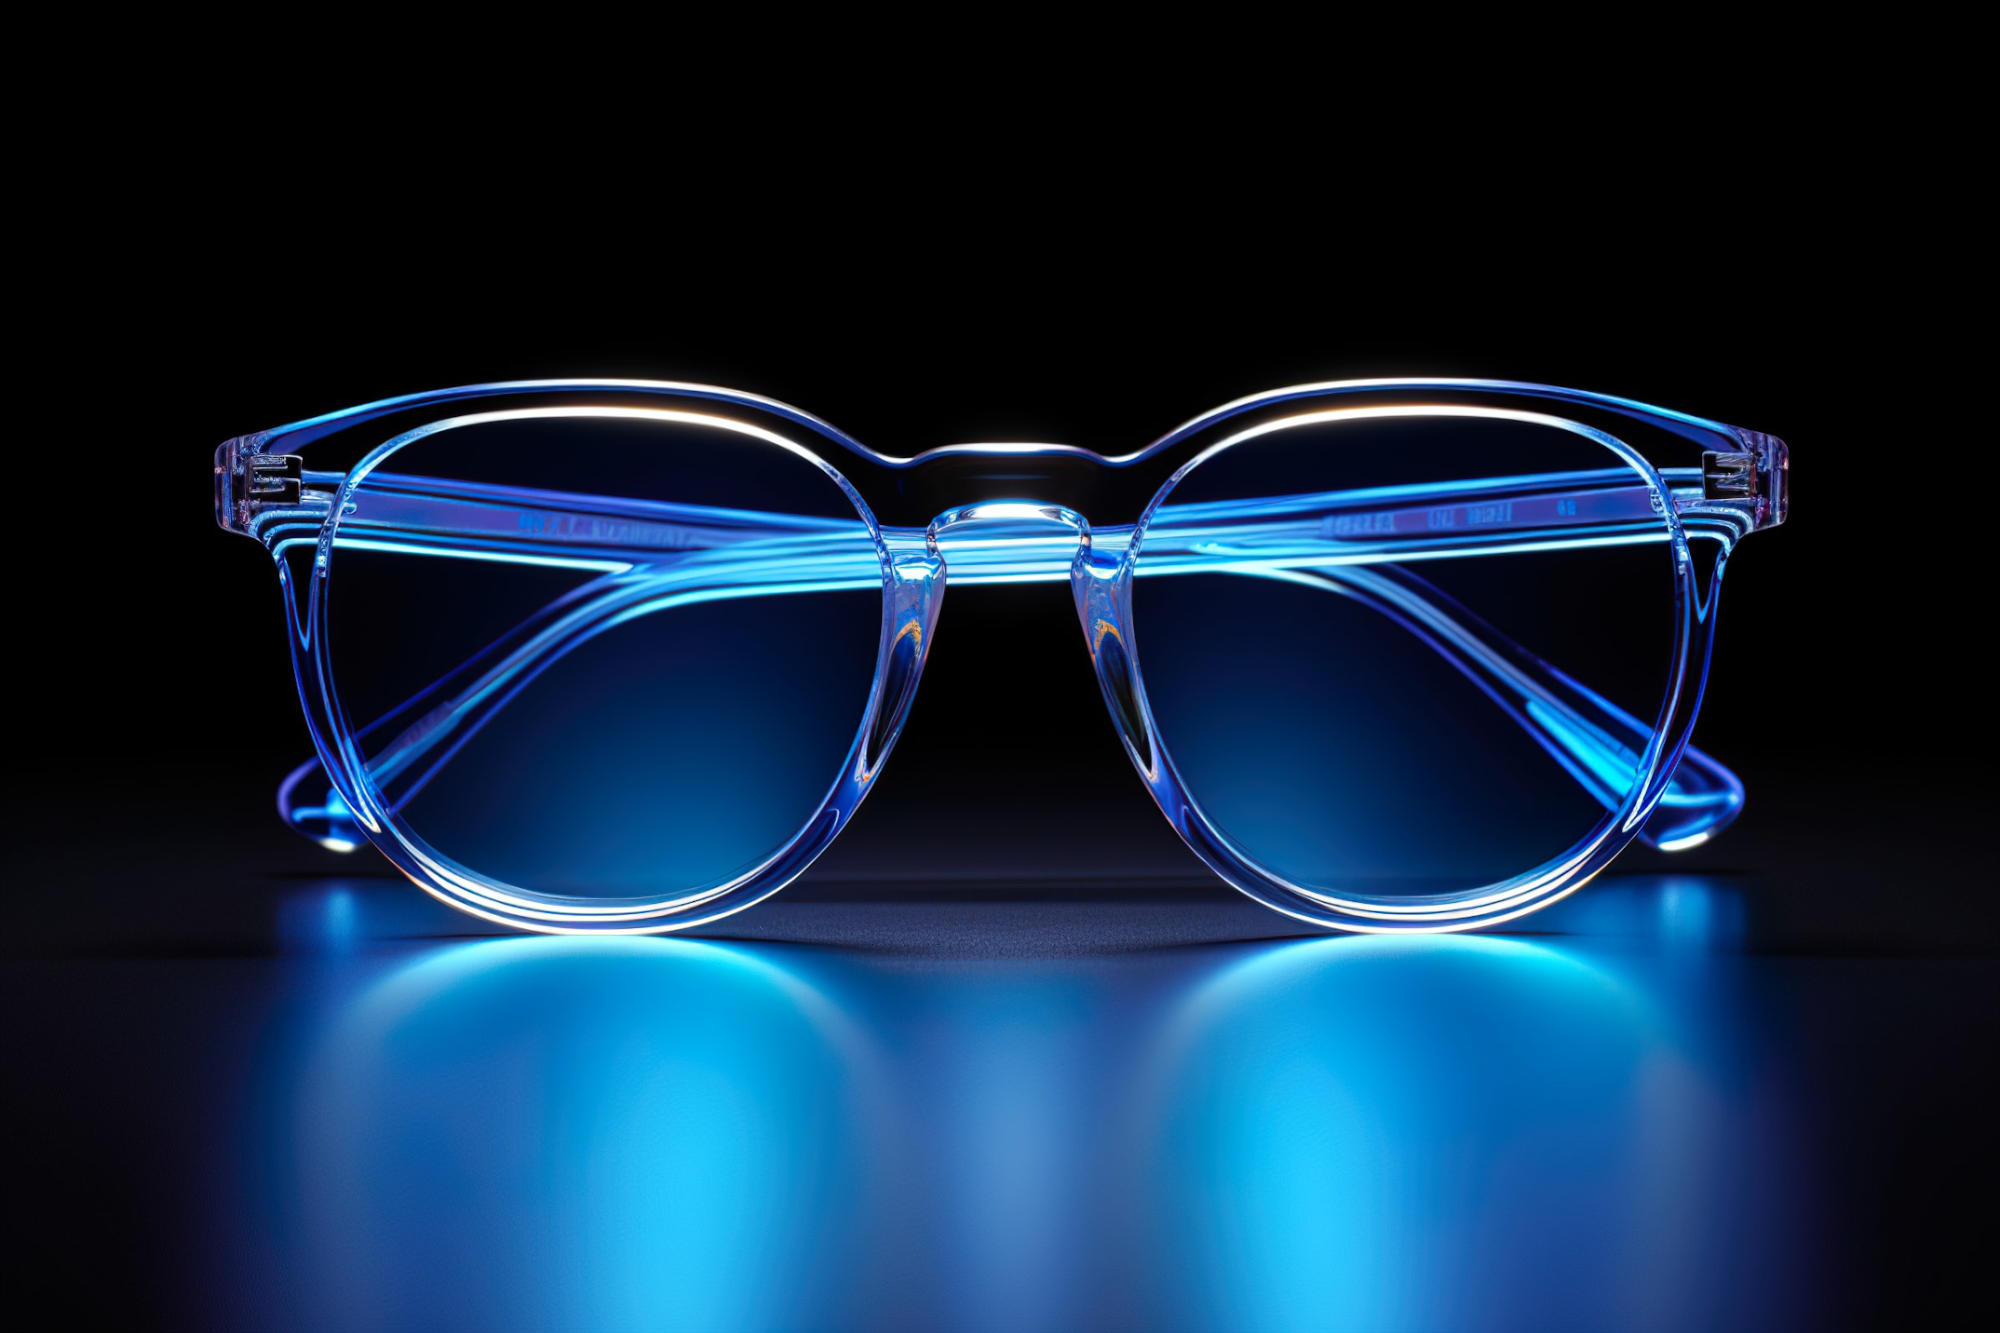 Assessing Effectiveness: Are Blue Light Blocking Glasses Worth It?